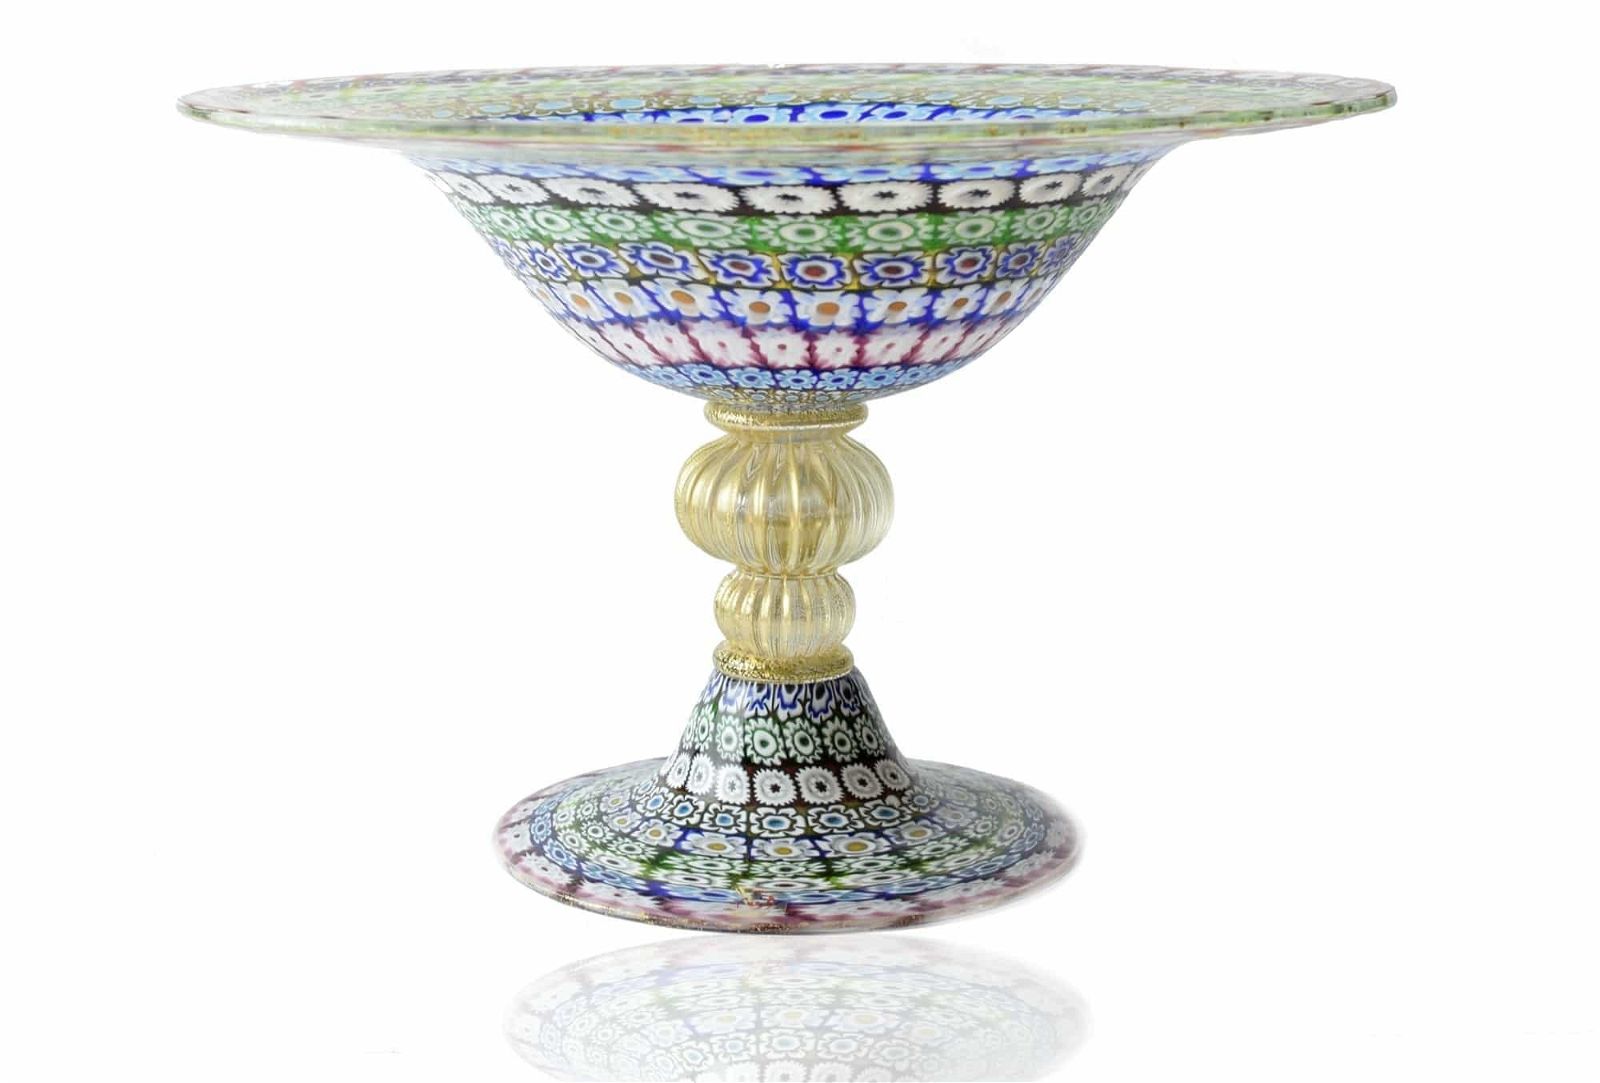 Murano glass millefiori centerpiece by Amedeo Rossetto, signed and dating to 2015, estimated at $4,500-$5,500 at Jasper52.